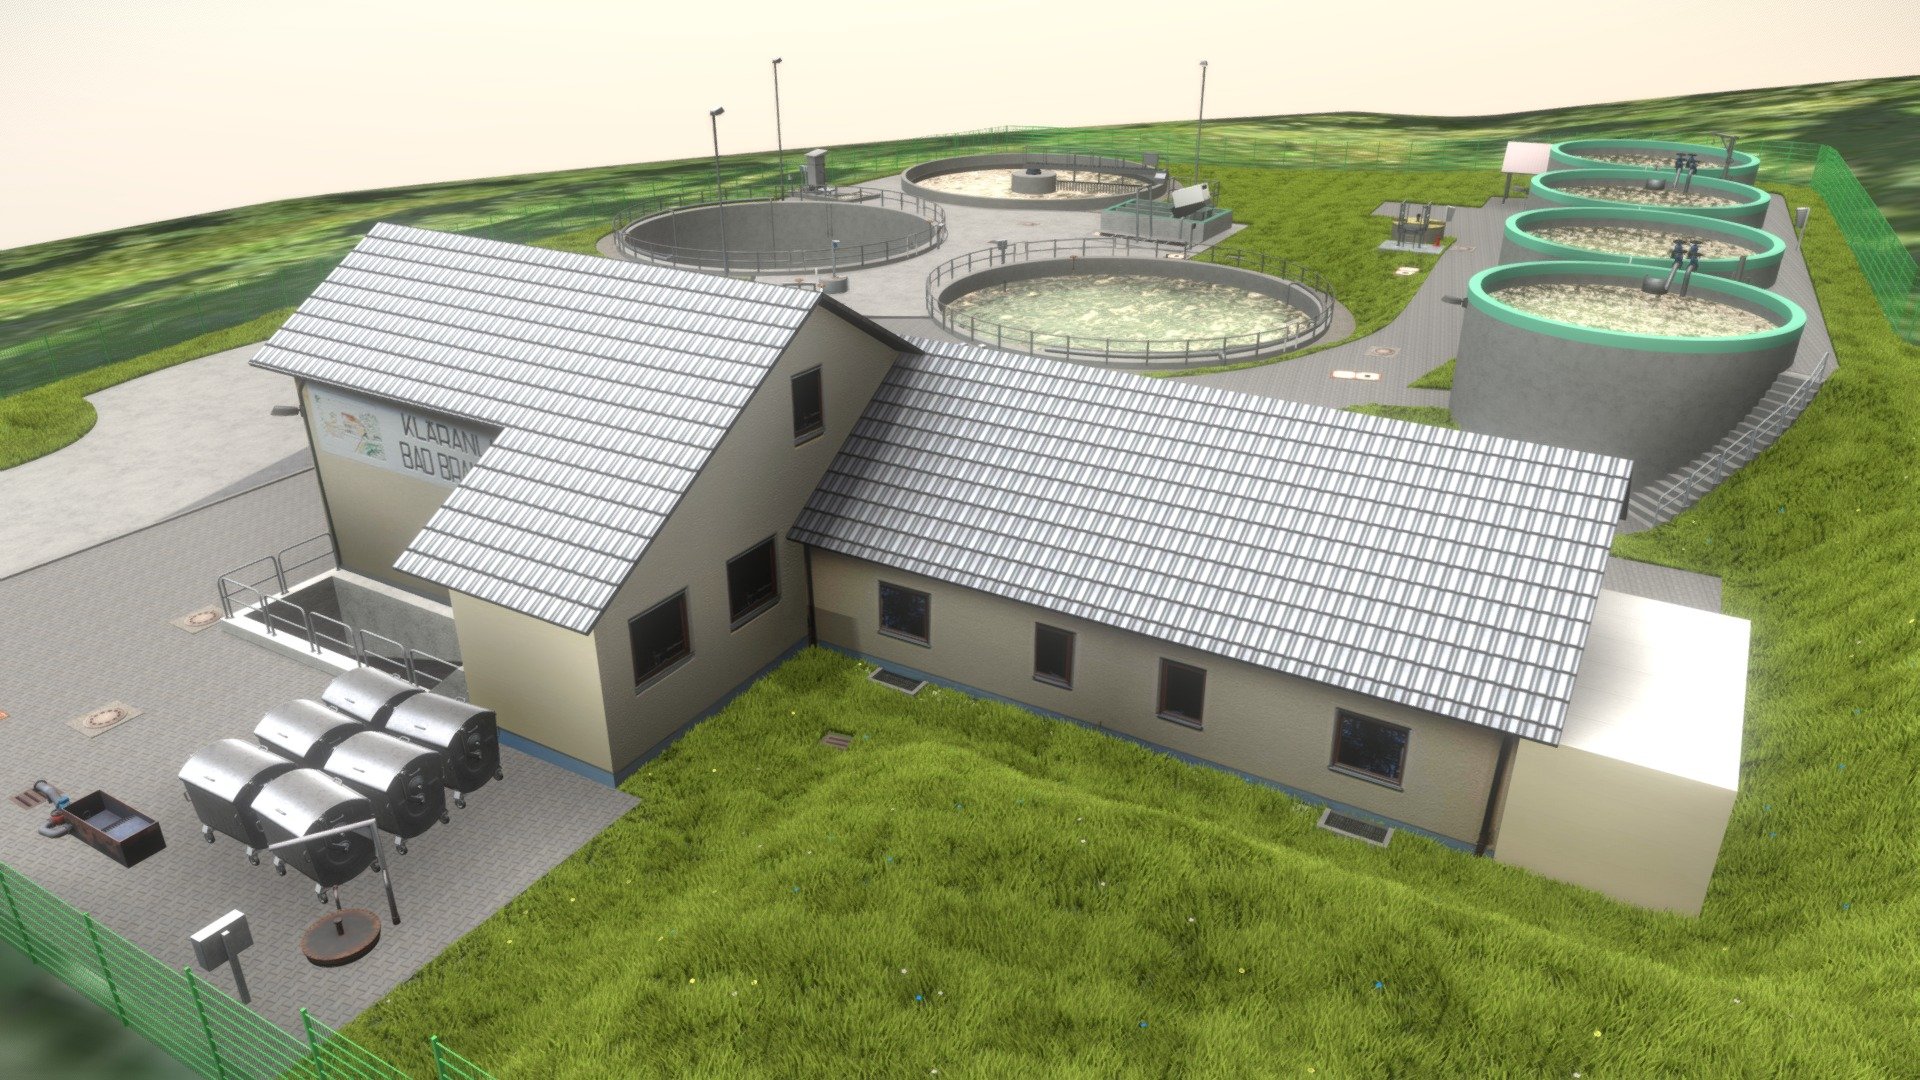 3d-Visualization of a wastewater treatment plant near Bad Brambach.







3D-Visualisierung einer Kläranlage bei Bad Brambach.






All 3d-models are also available individually in this collection.









 - Wastewater Treatment Plant - Bad Brambach - 3D model by VIS-All-3D (@VIS-All) 3d model